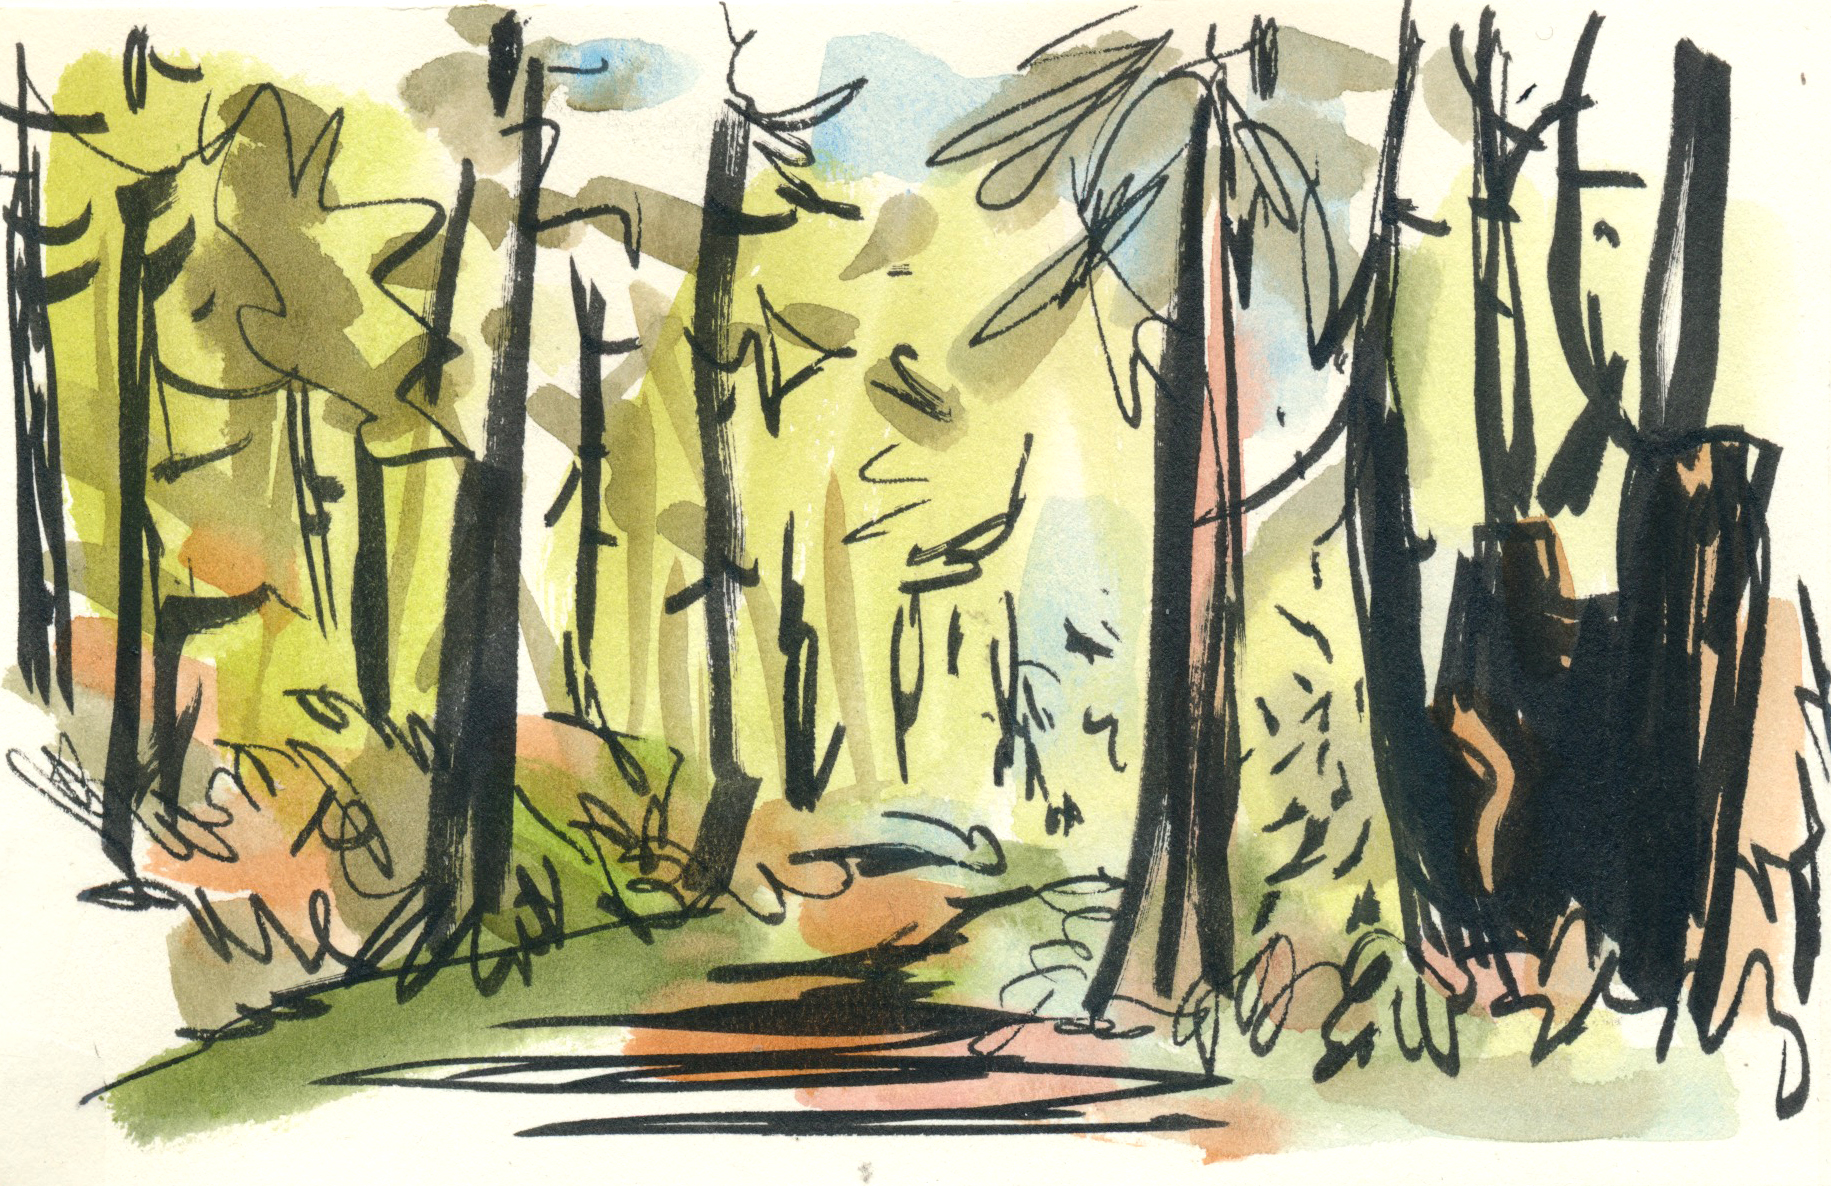 Apple-Pine: A Story of a my Big Sketchbook Painting Disaster